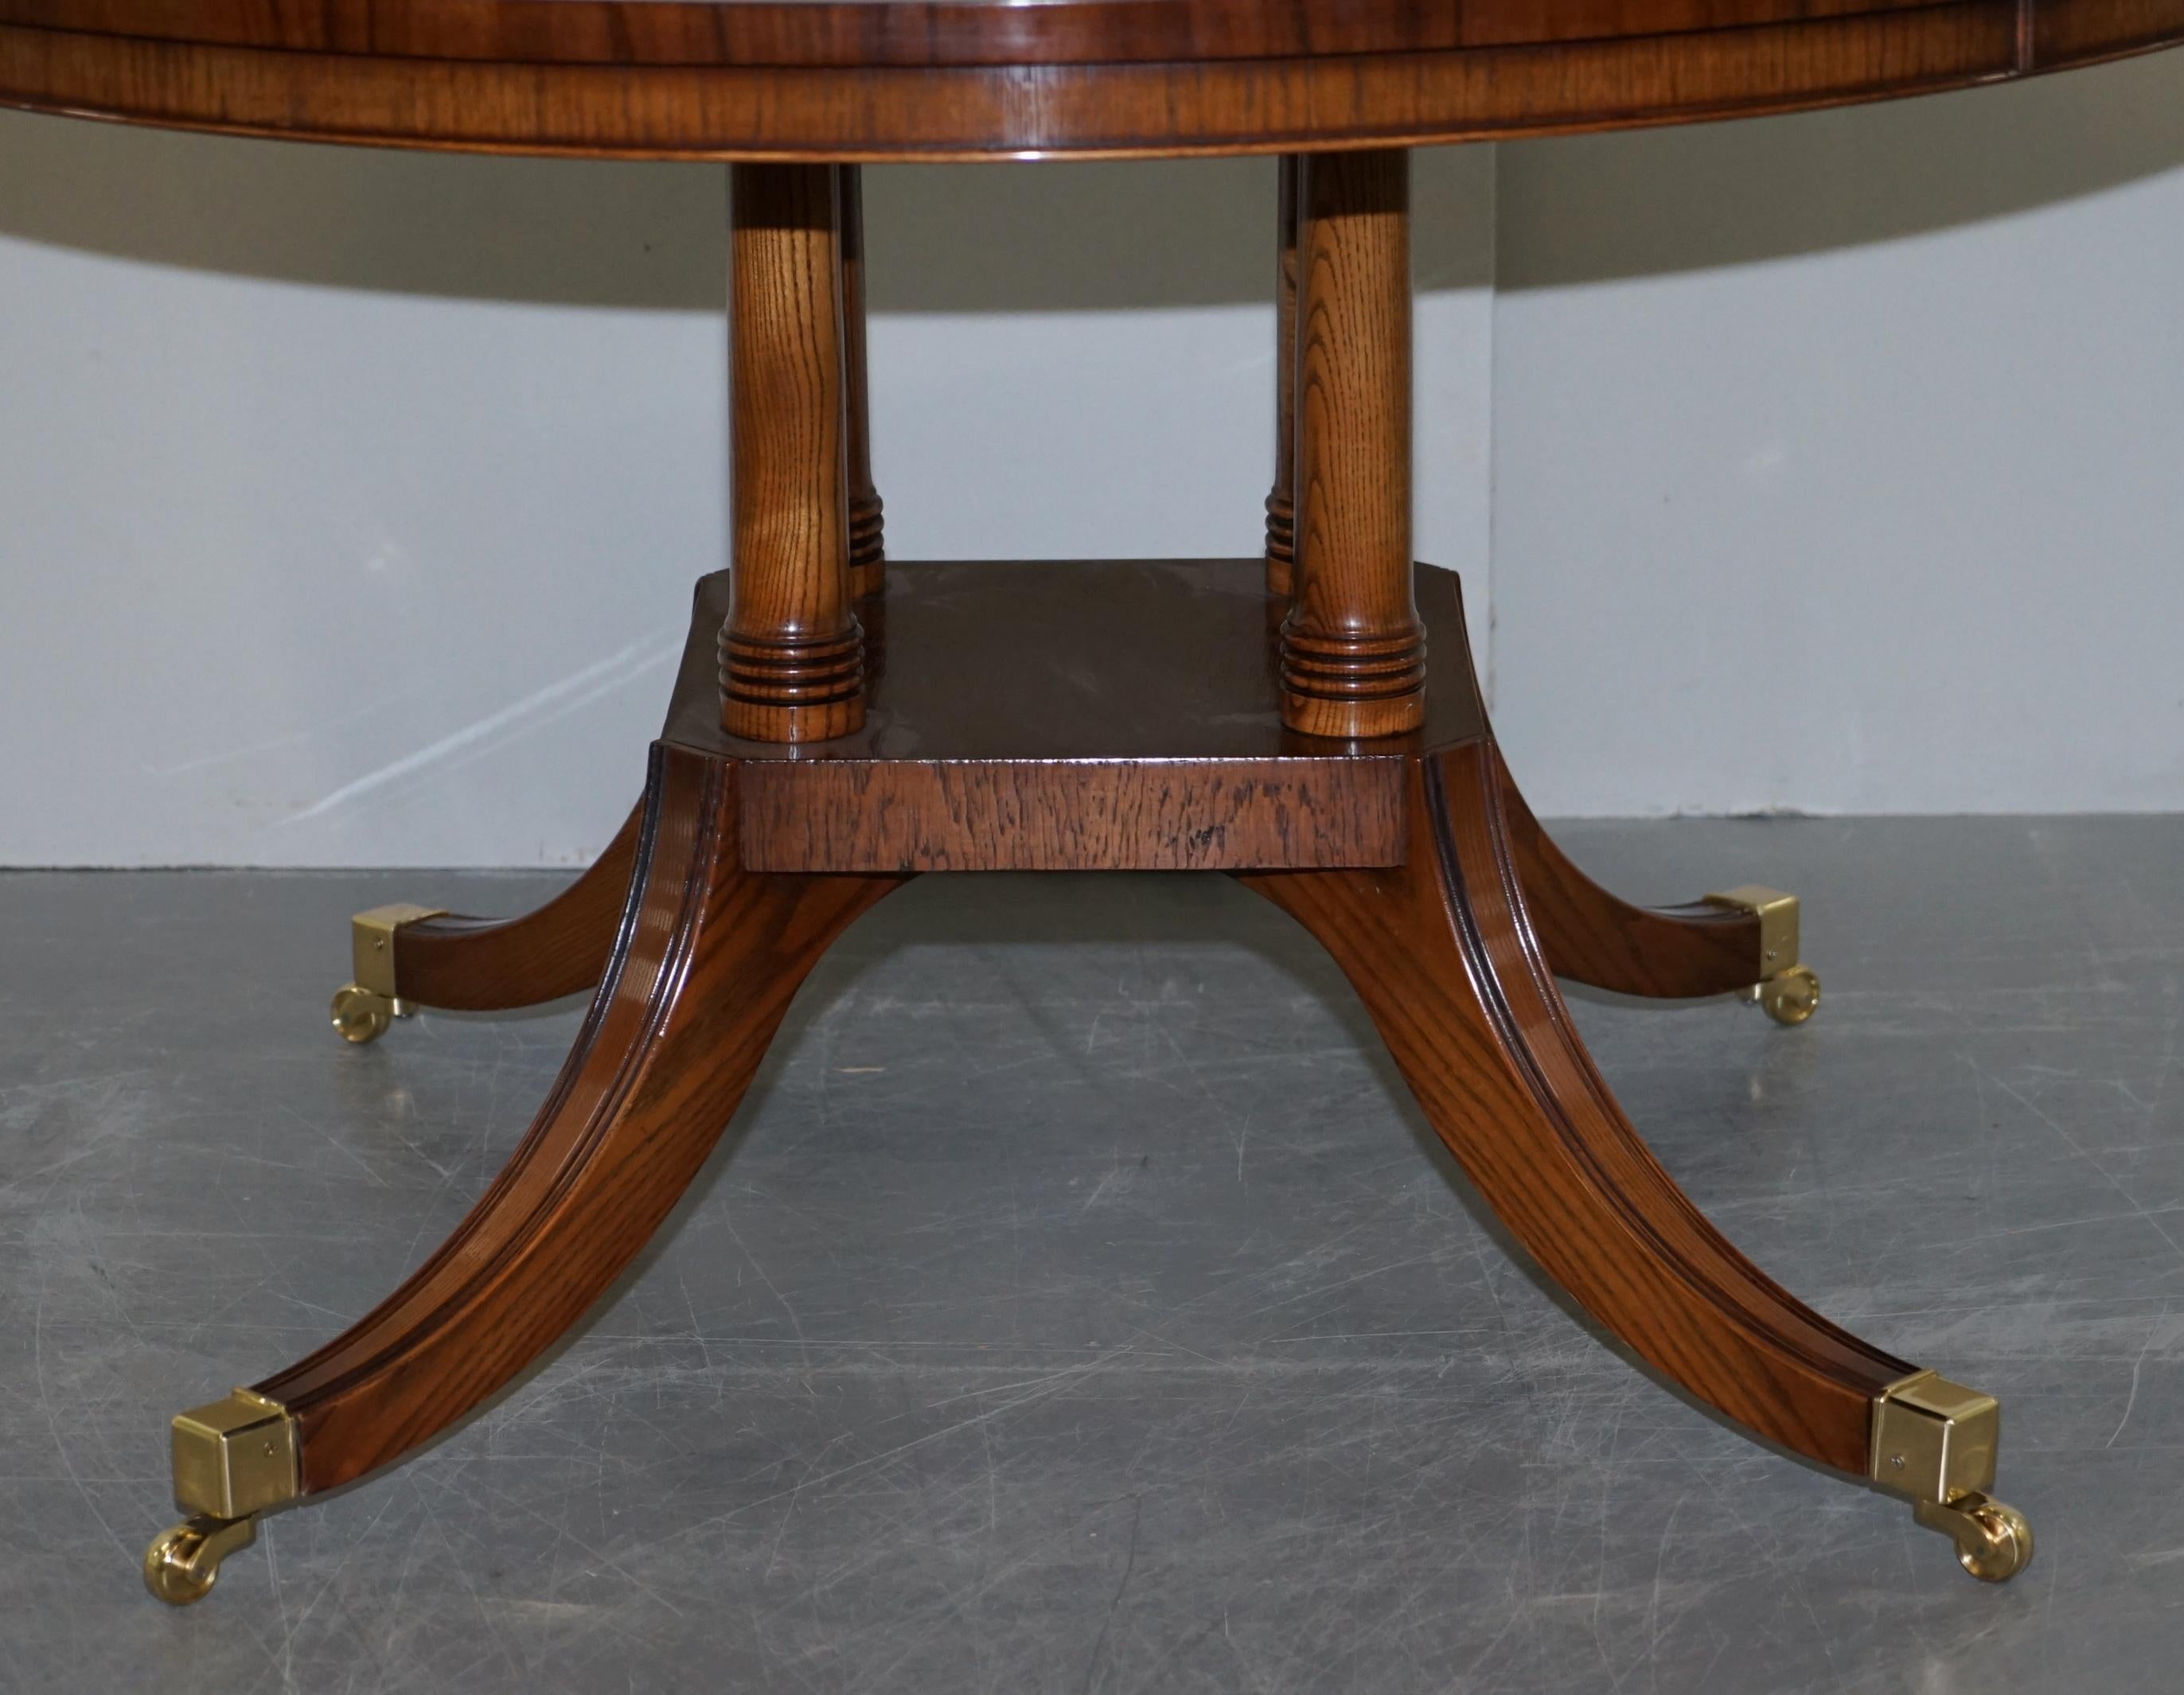 Other Brand New Cluster Pollard Oak Round Dining Tables Seats Four to Six People For Sale